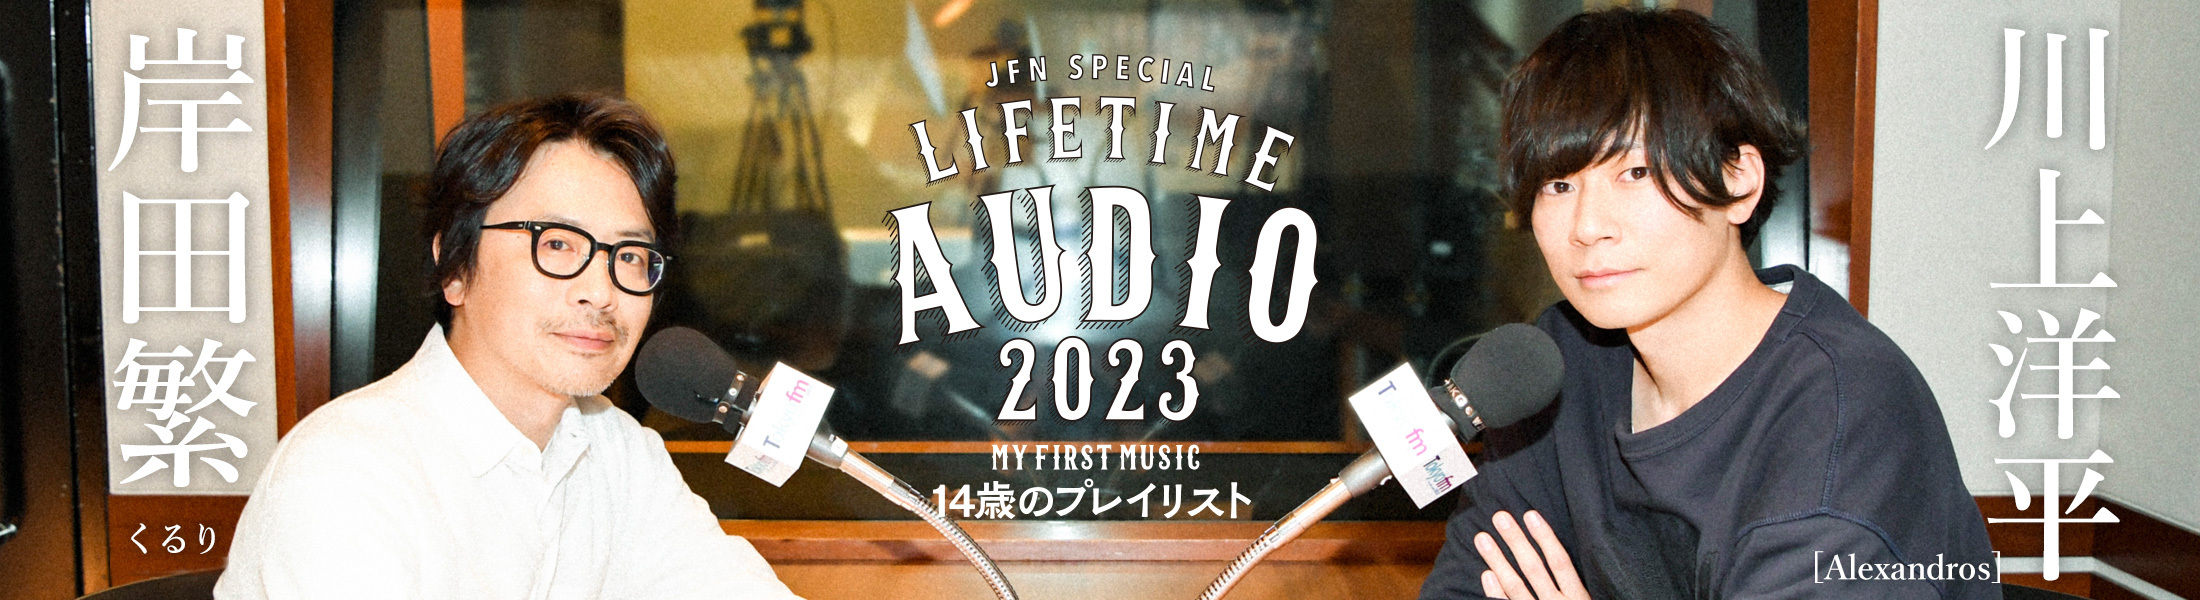 JFN Special Life Time Audio 2023～My First Music～「14歳のプレイリスト」